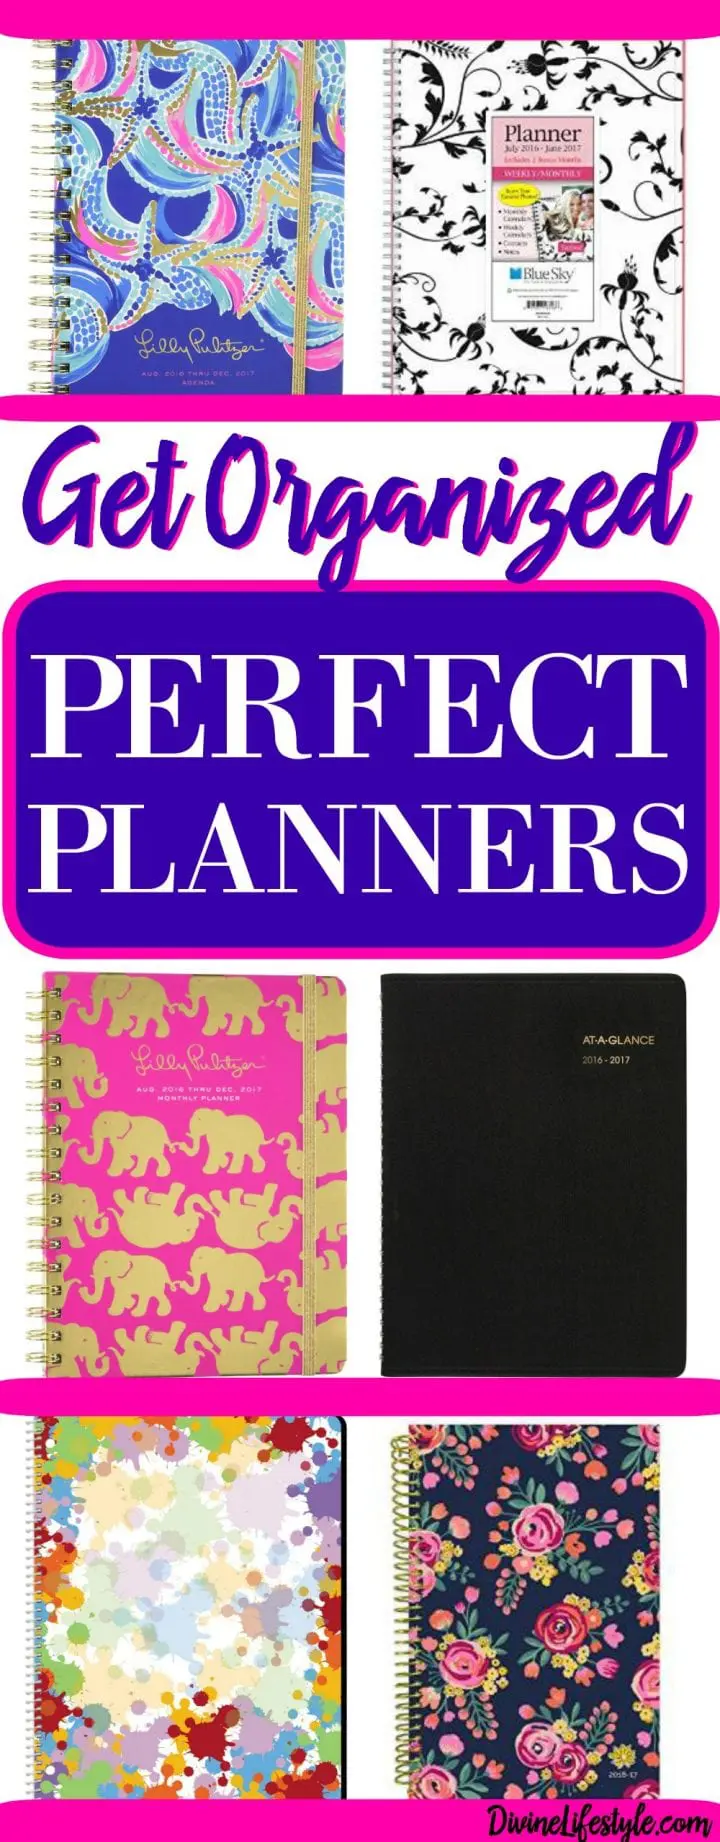 Get Organized Perfect Planners